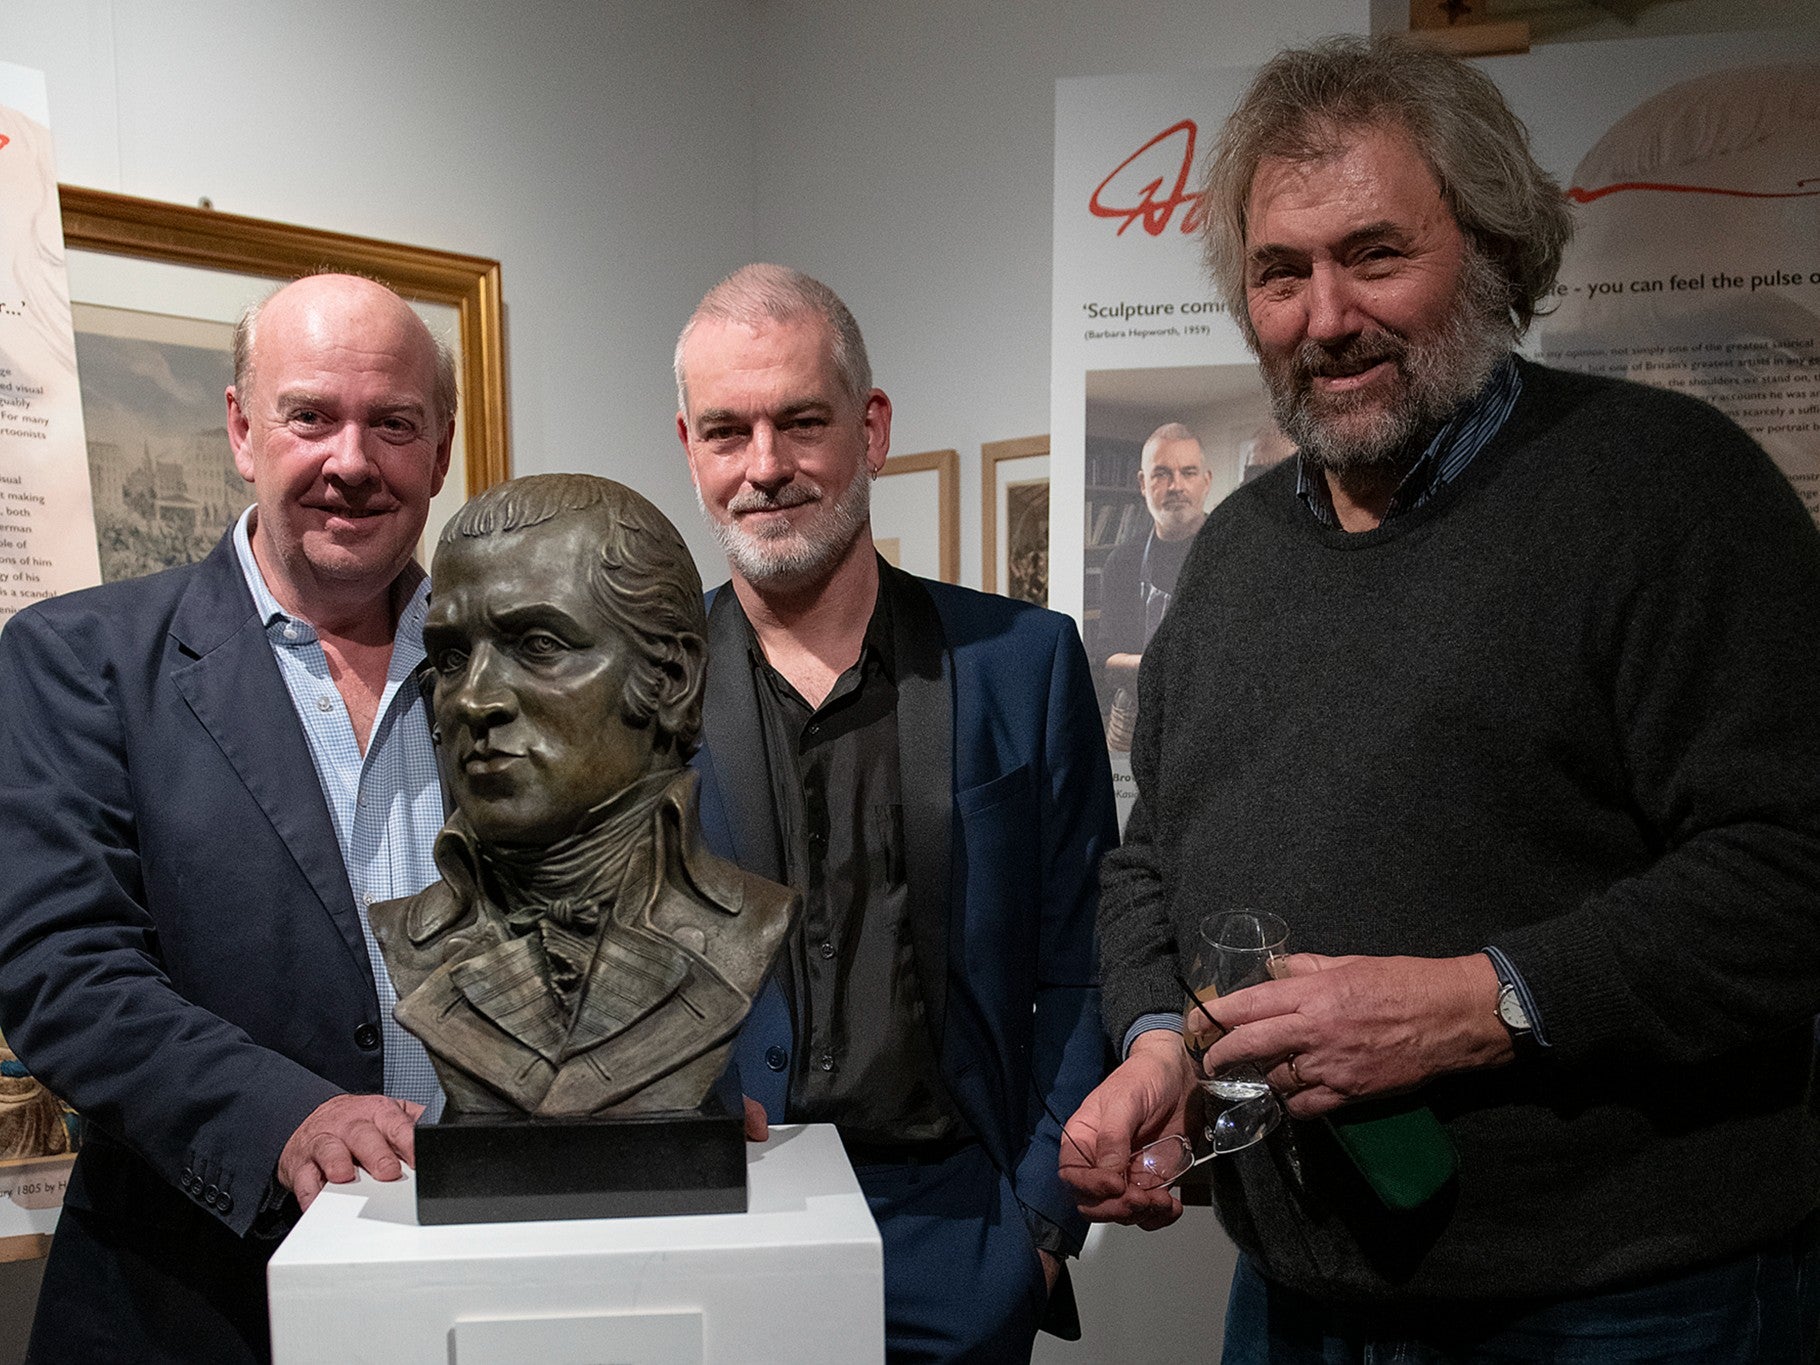 From left to right: Oliver Preston, chair the Cartoon Museum, Dave Brown, Steve Bell, trustee the Cartoon Museum